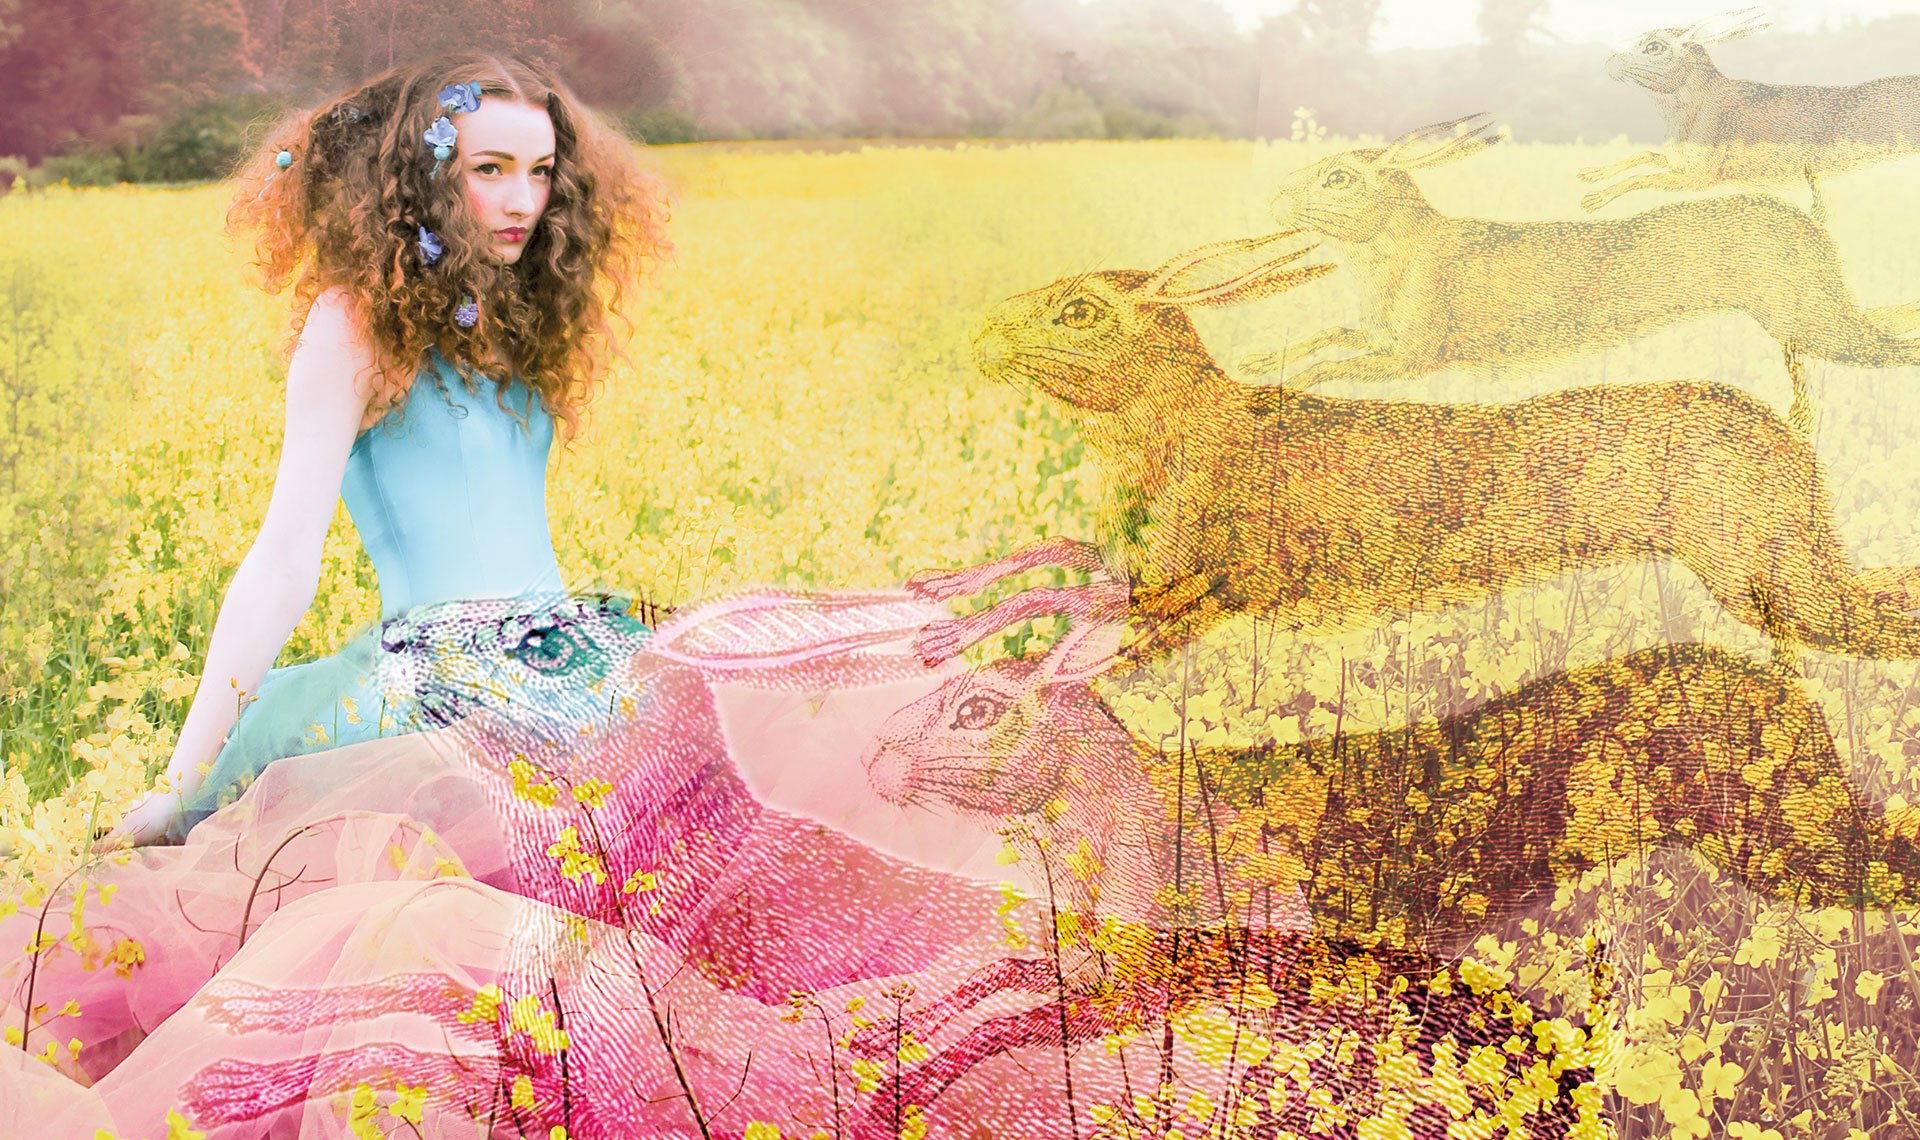 young woman in a turquoise sits in a field of yellow flowers with hares superimposed over the image